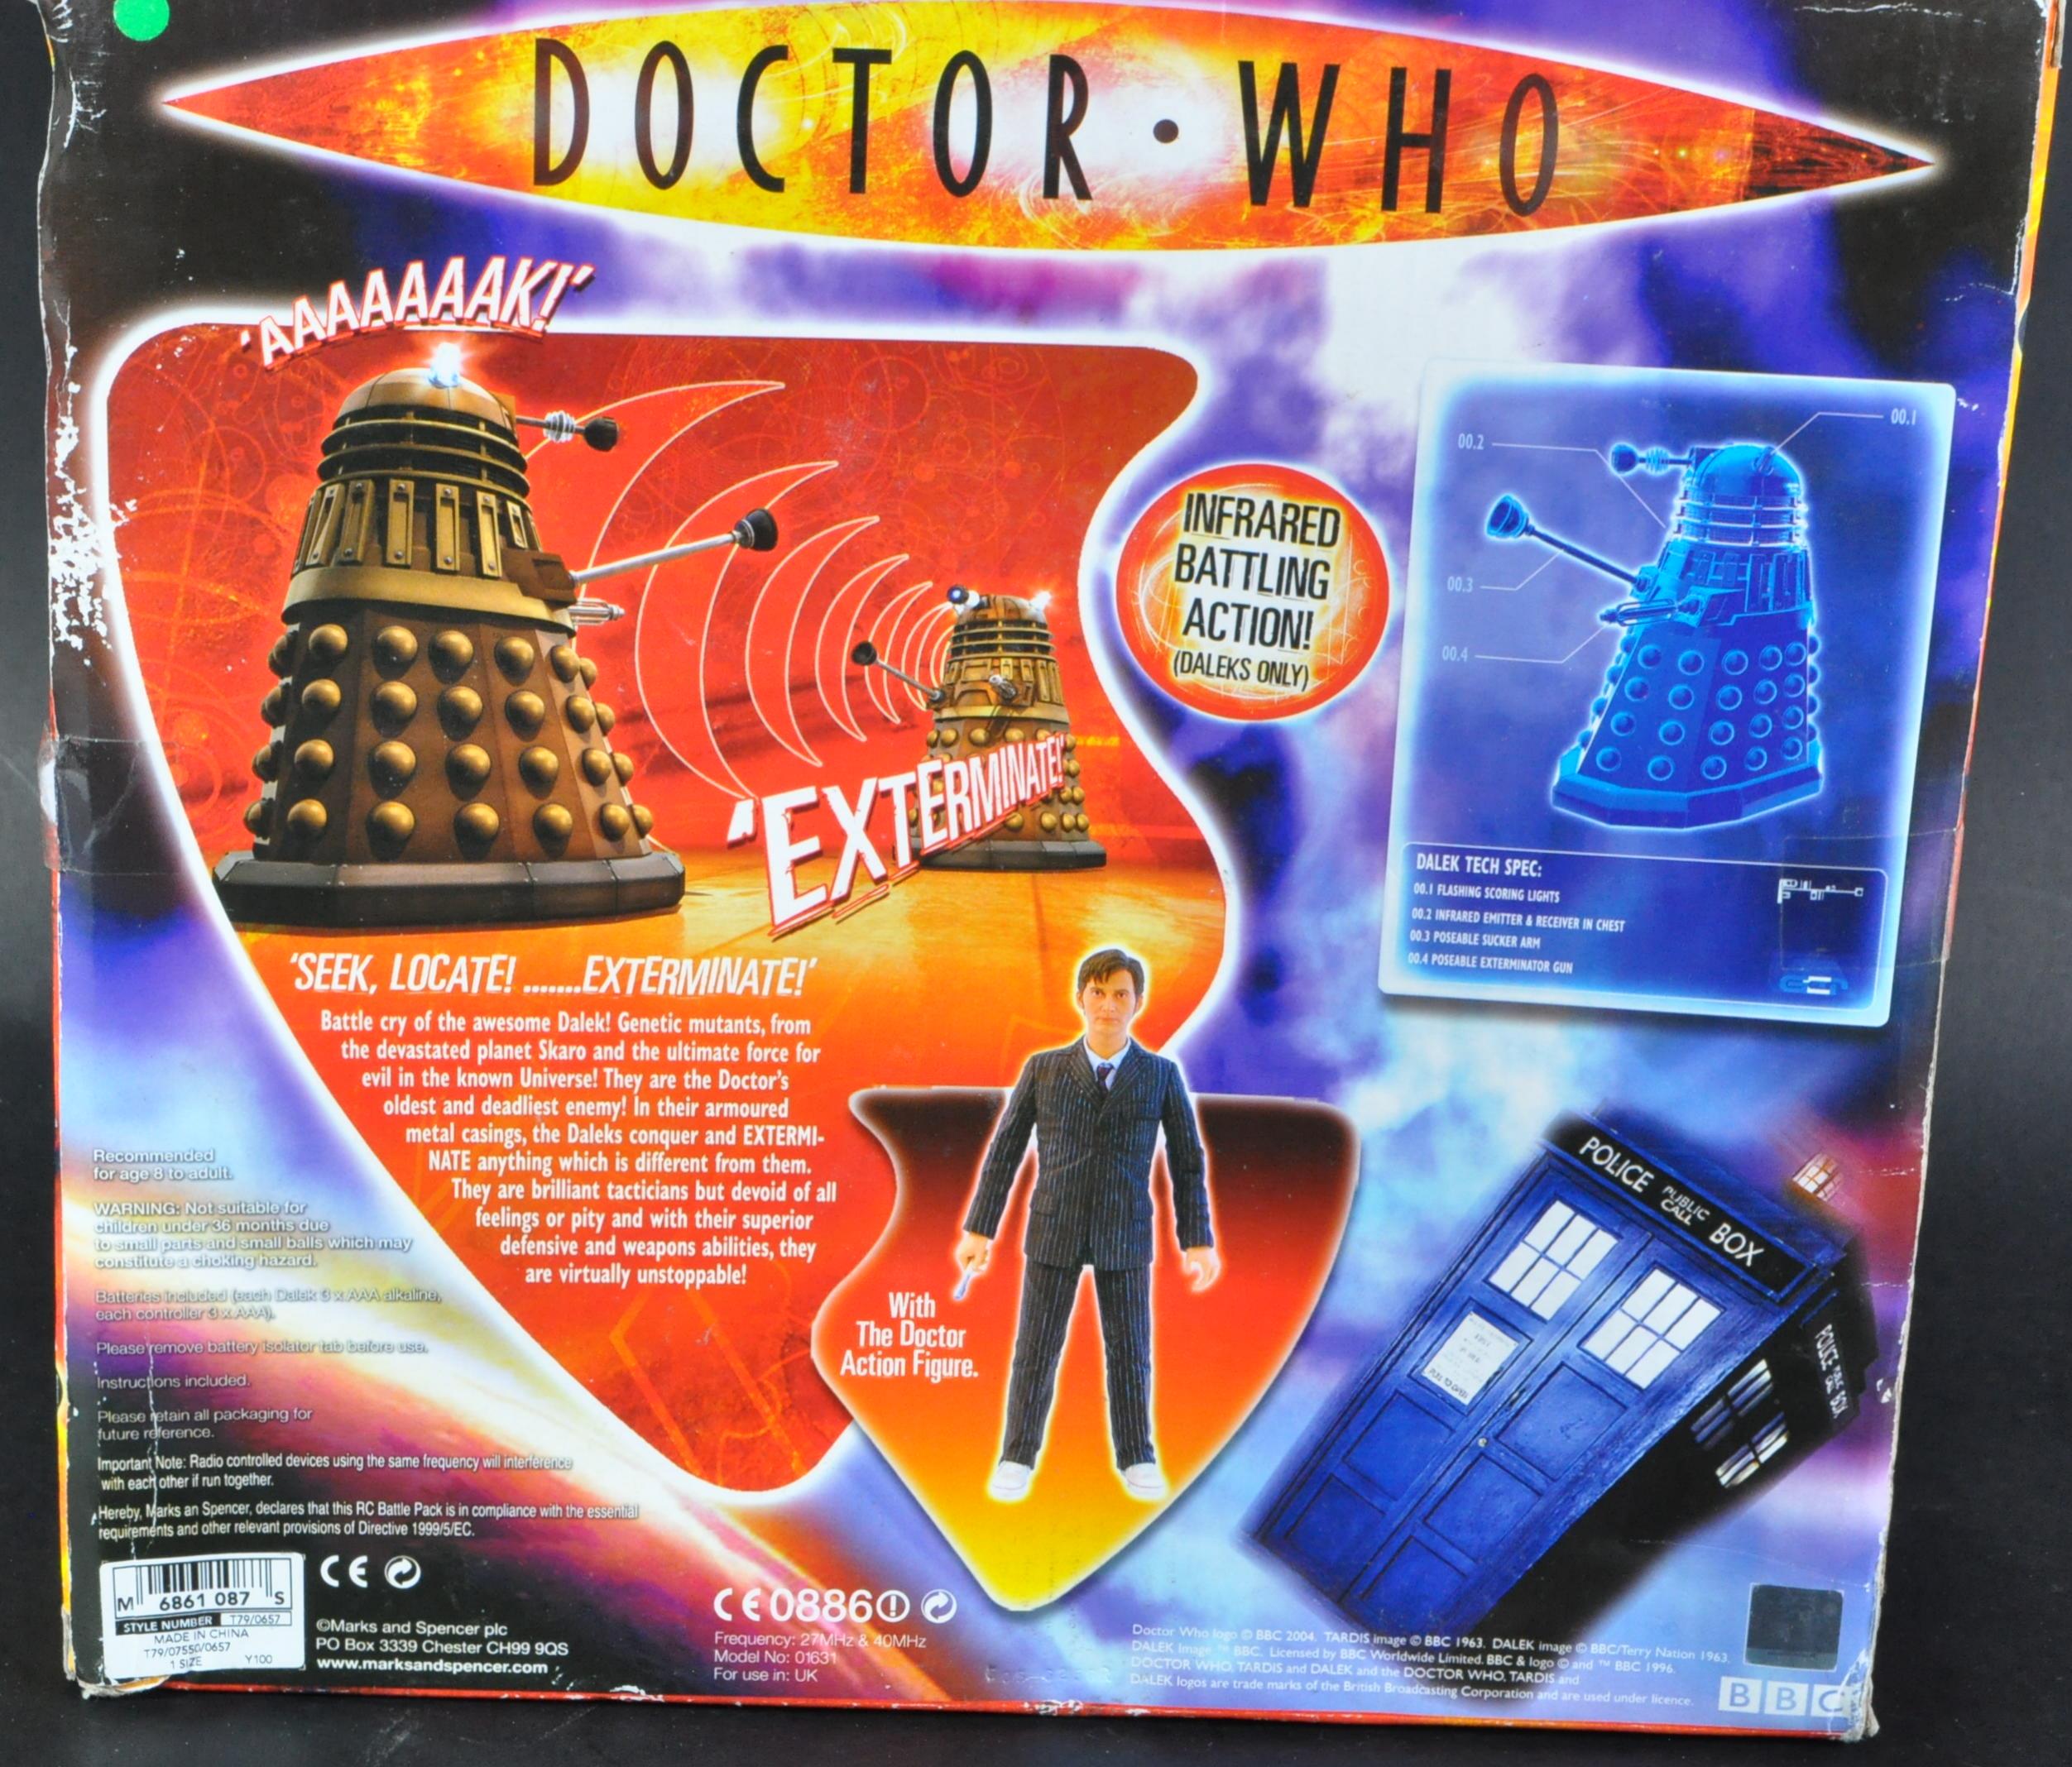 DOCTOR WHO - CHARACTER OPTIONS - MINI RC DALEK BATTLE PACK - Image 4 of 4